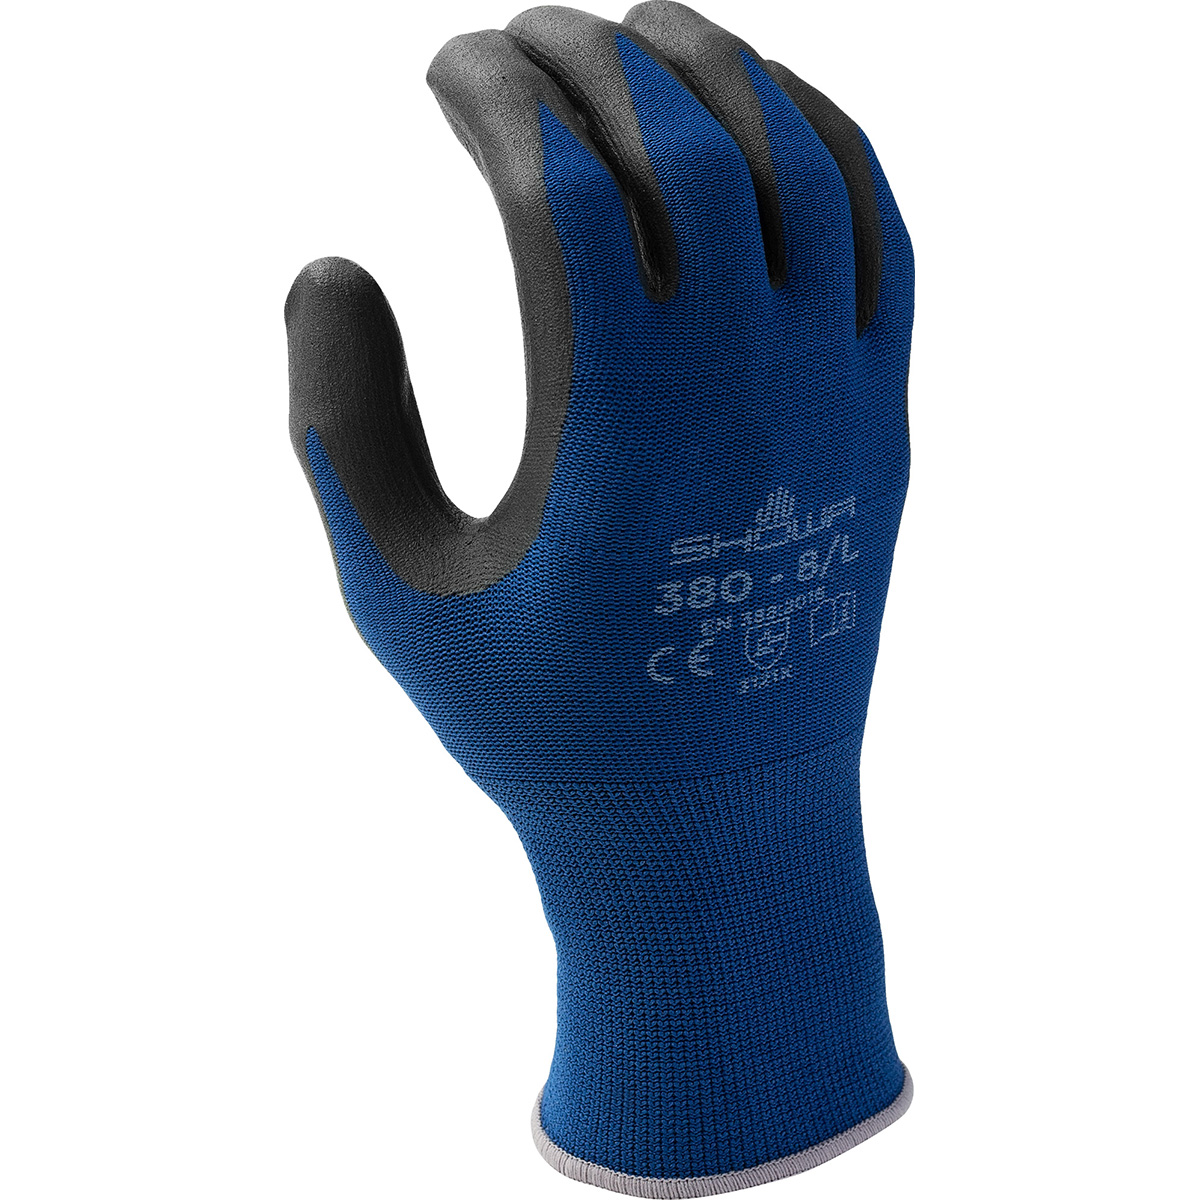 General purpose patented waffle pattern foamed nitrile-coated, palm dipped, blue w/black coating, 13 gauge seamless, knitted liner, large - General Purpose